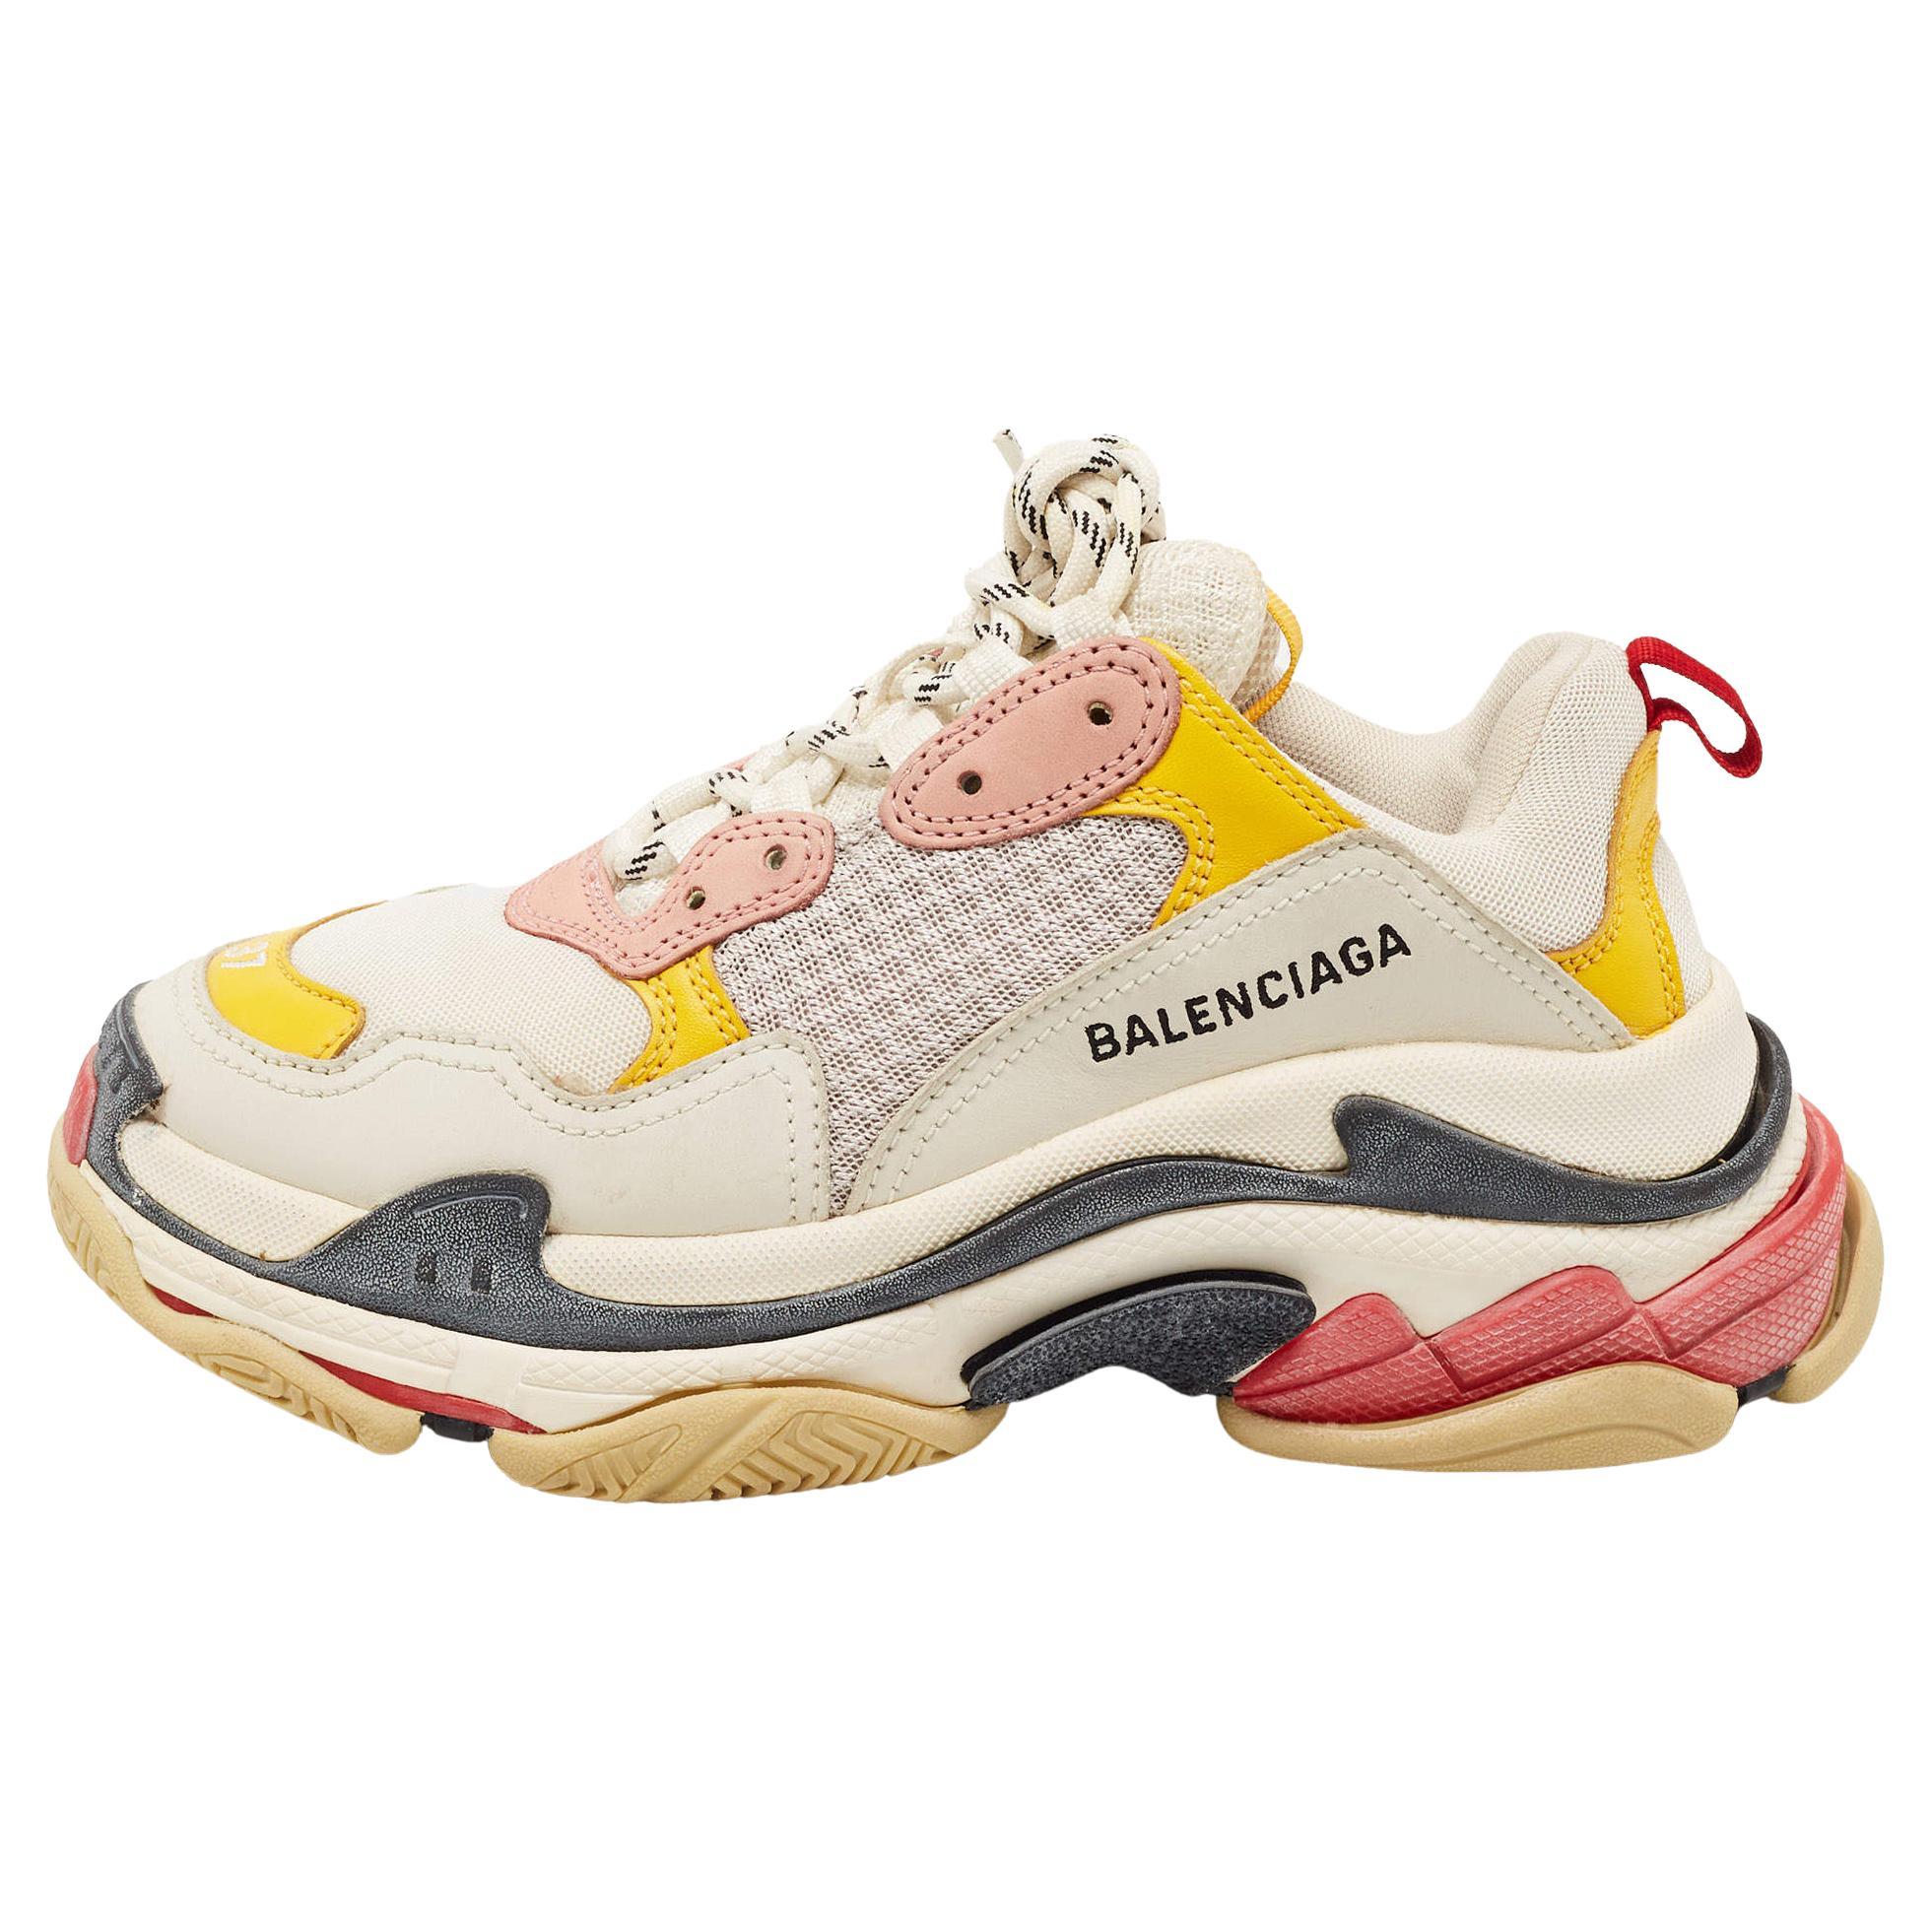 Balenciaga Multicolor Leather And Mesh Triple S Platform Sneakers